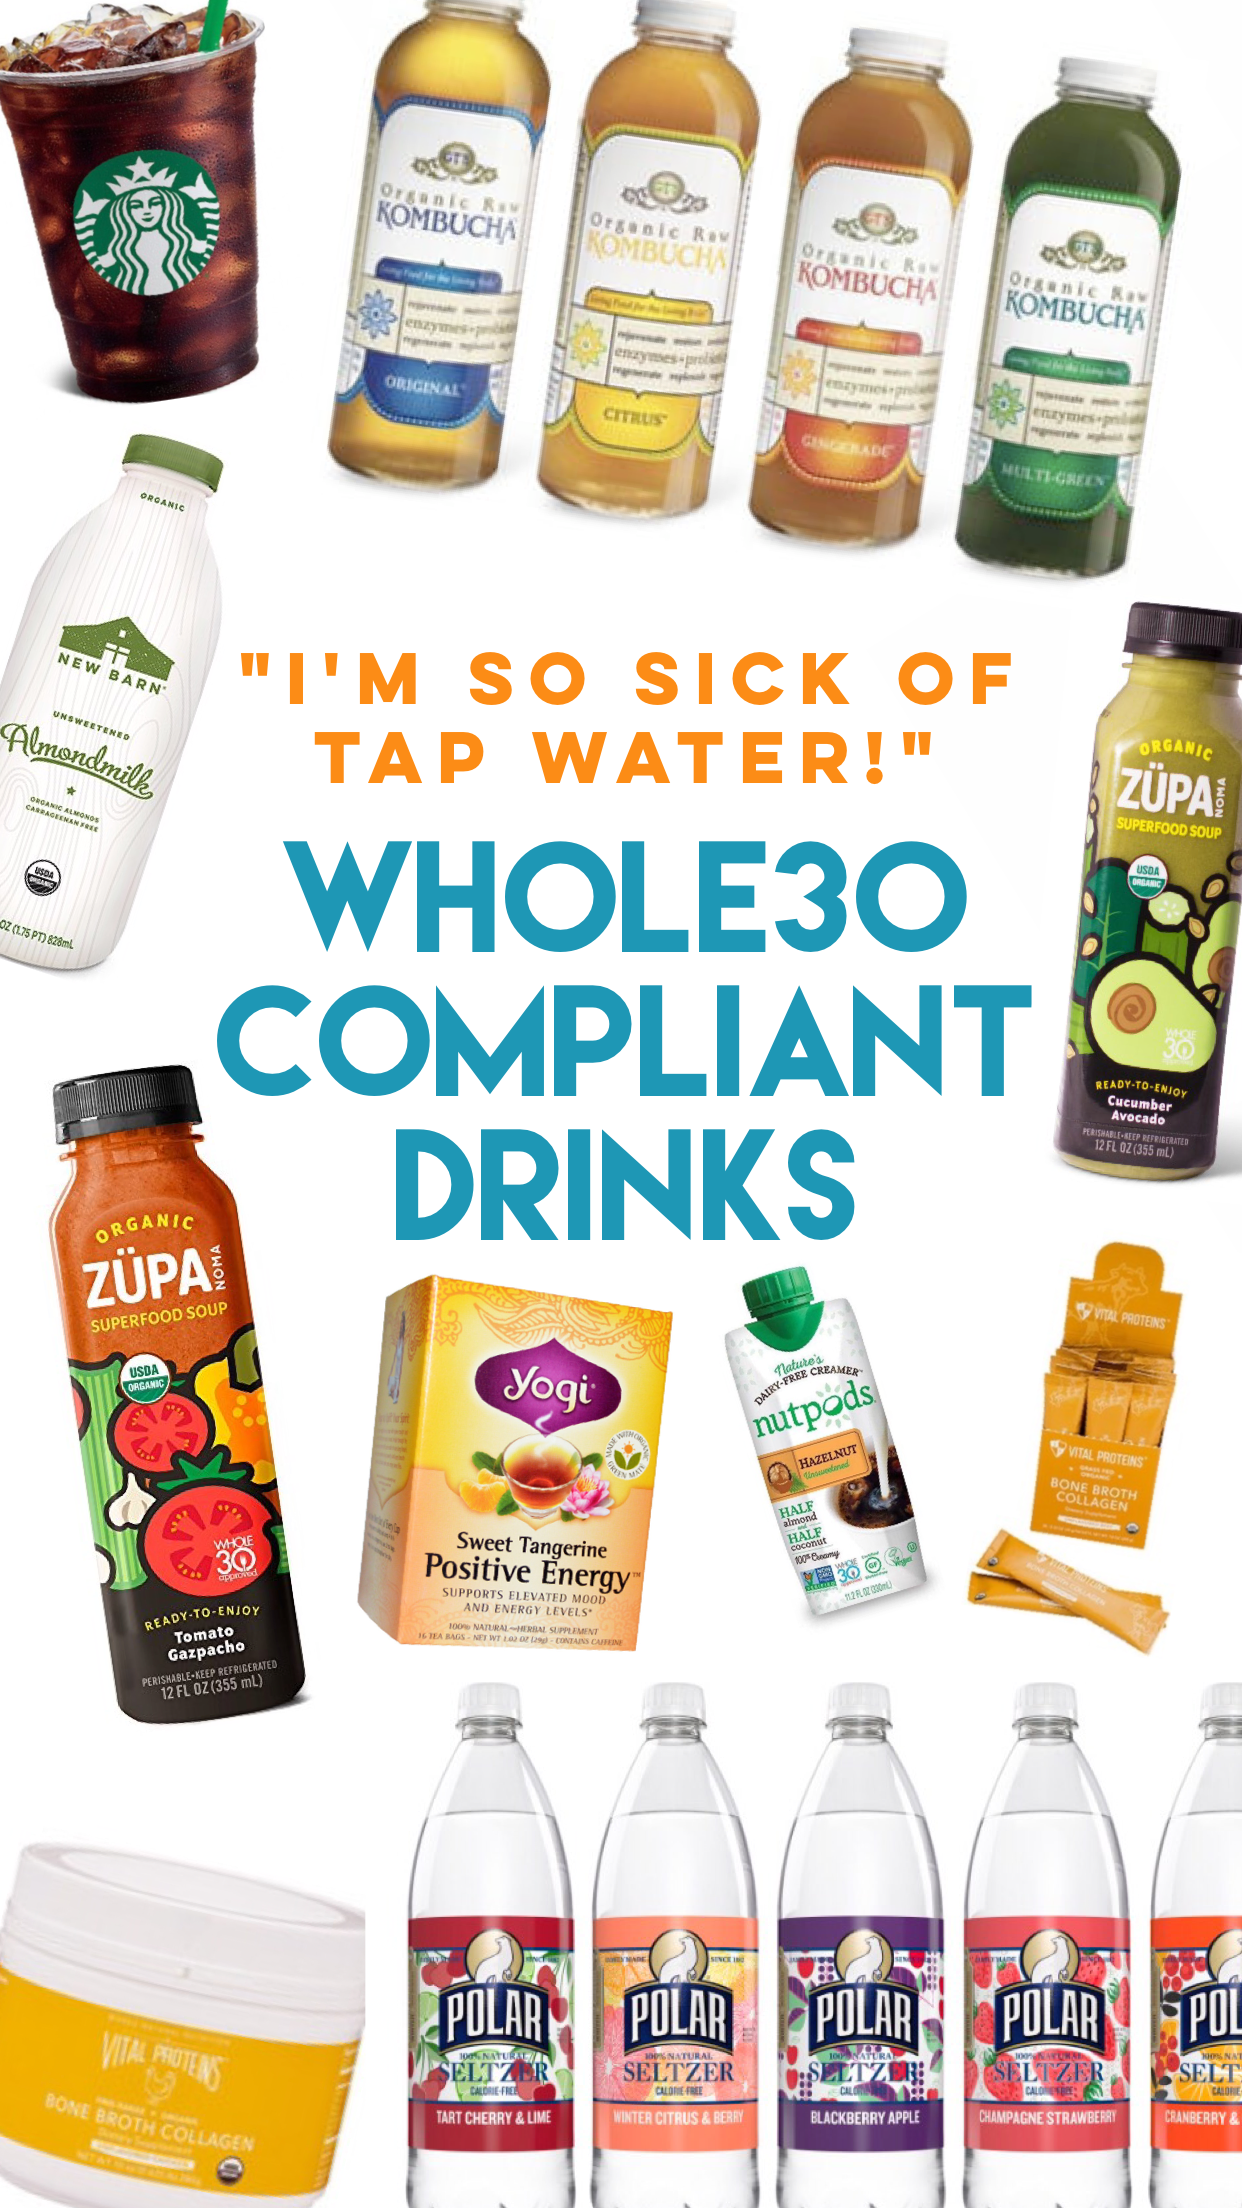 Whole30 compliant drinks